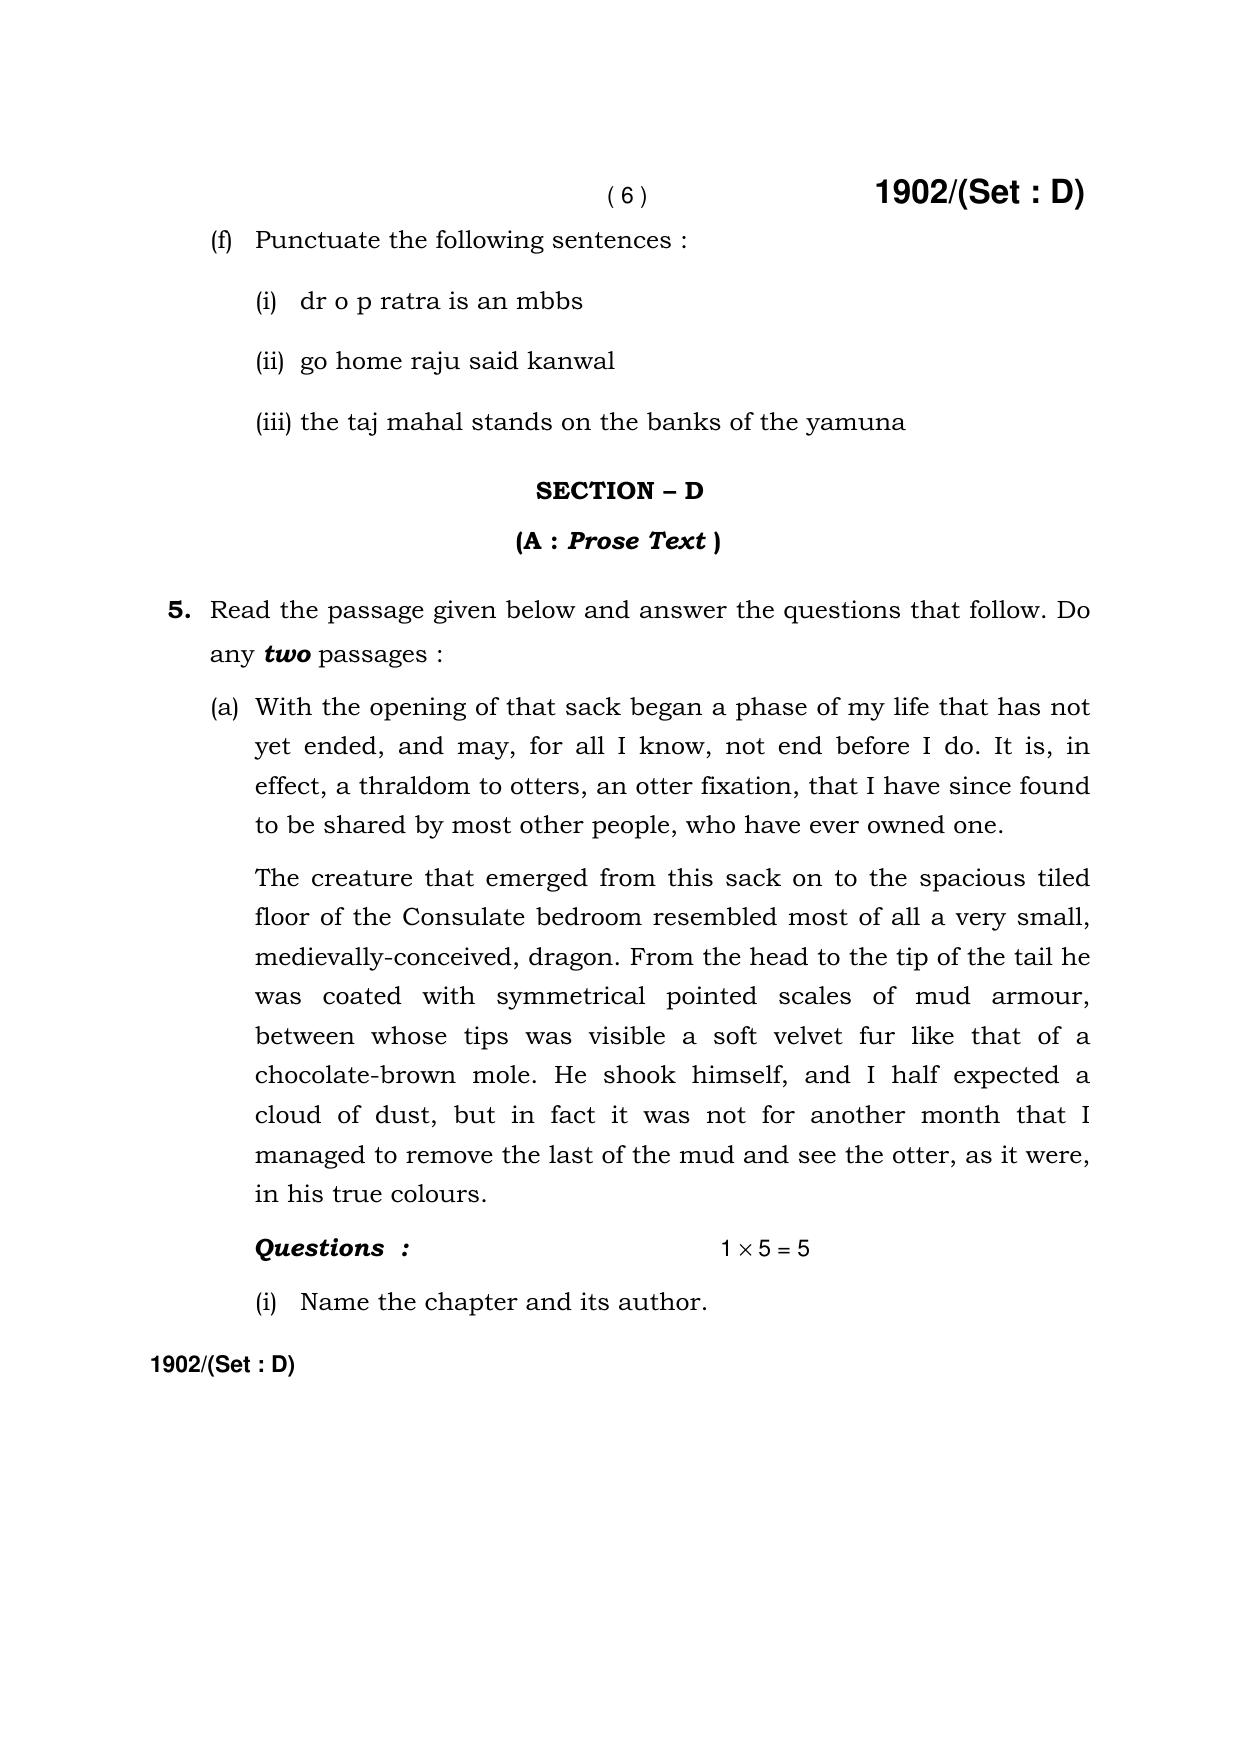 Haryana Board HBSE Class 10 English -D 2017 Question Paper - Page 6